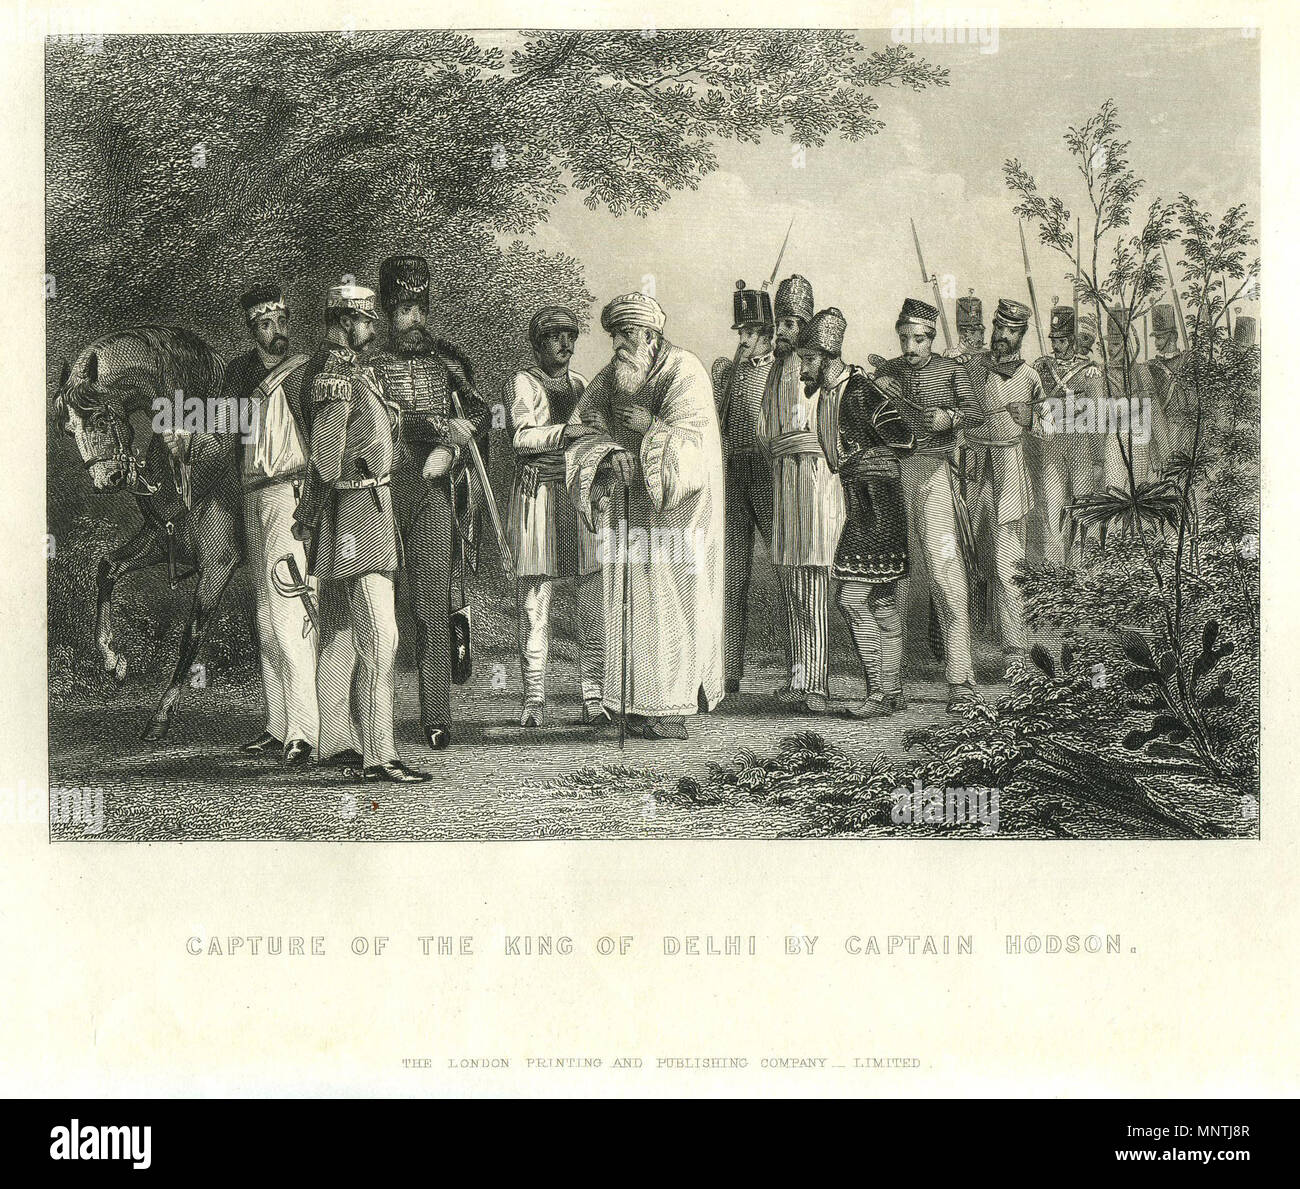 . 'Capture of the King of Delhi by Captain Hodson', steel engraving. Captain William Hodson captured Bahadur Shah II on 20 September 1857 during the Sepoy Mutiny. 1860s. London Printing and Publishing Co., Ltd. 1170 The capture of the king of delhi by Captain Hodson Stock Photo